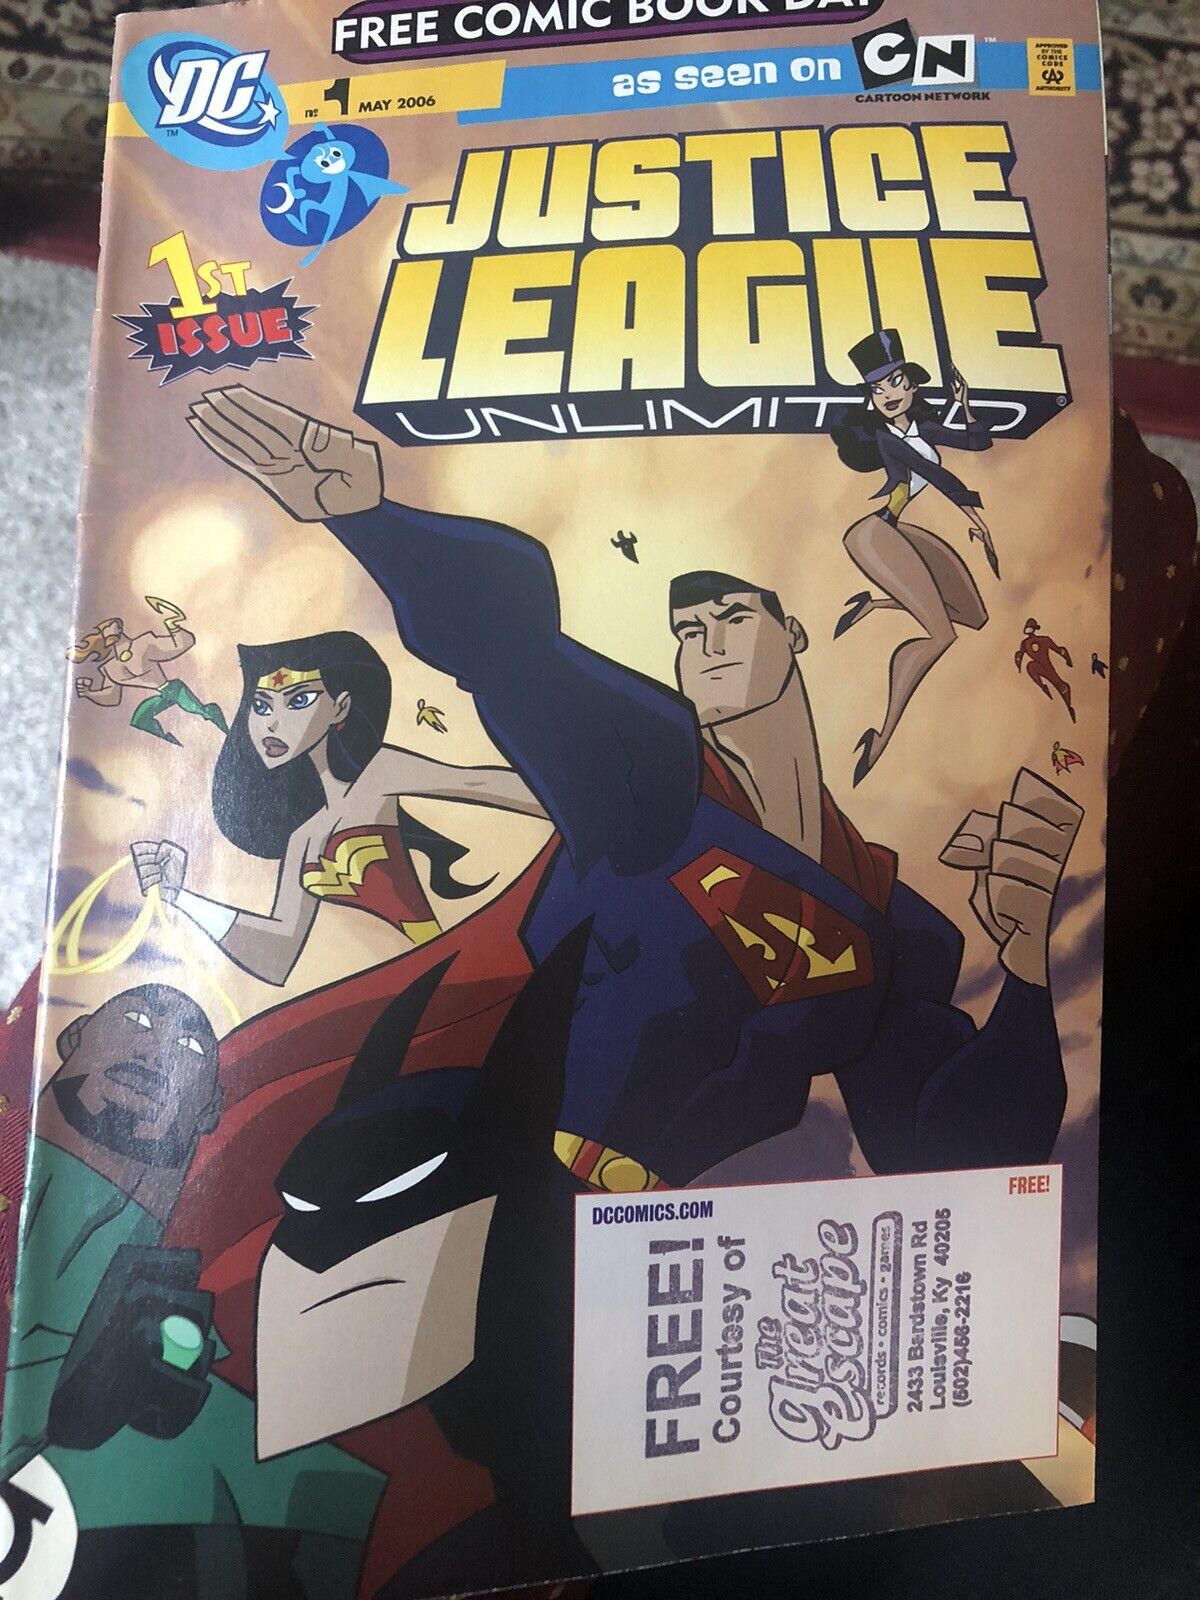 Justice League Unlimited Divide and Conquer Free Comic Book Day (DC Comics) 